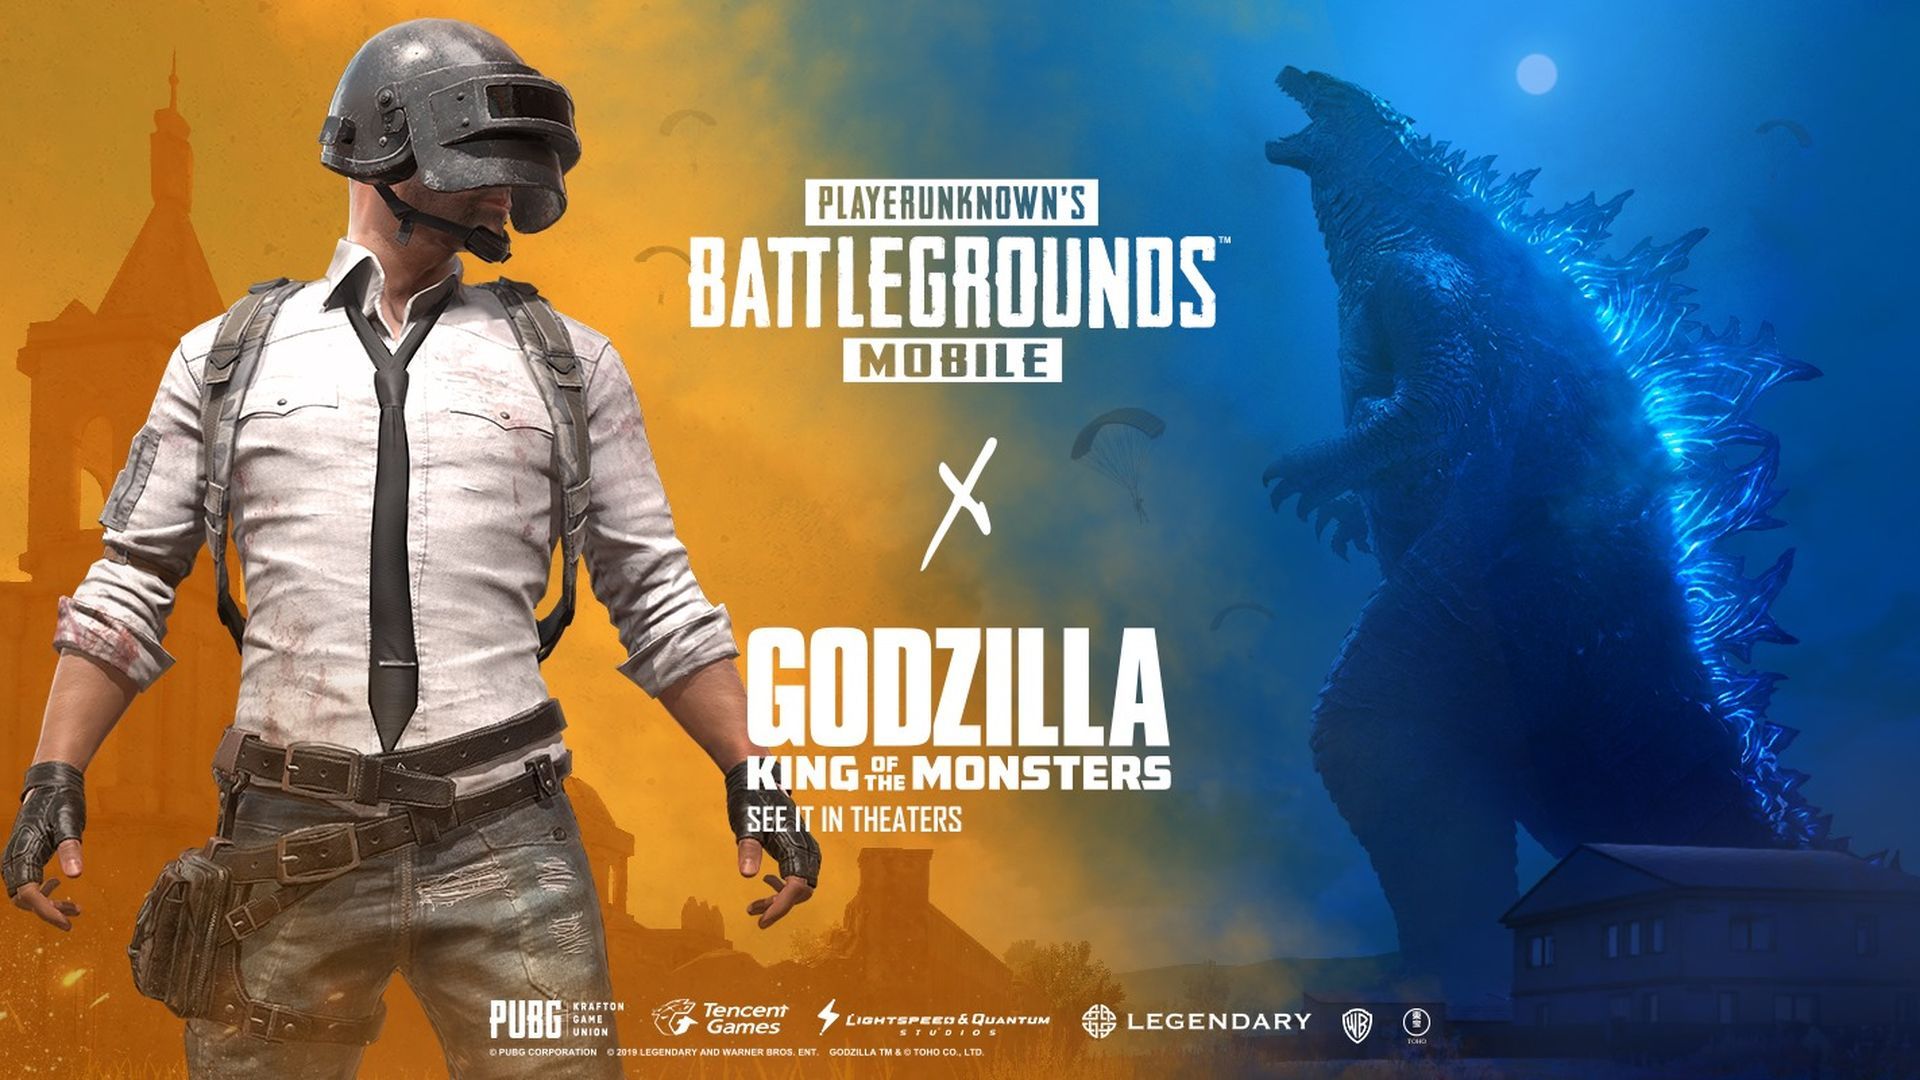 PUBG Mobile's next crossover is with Godzilla